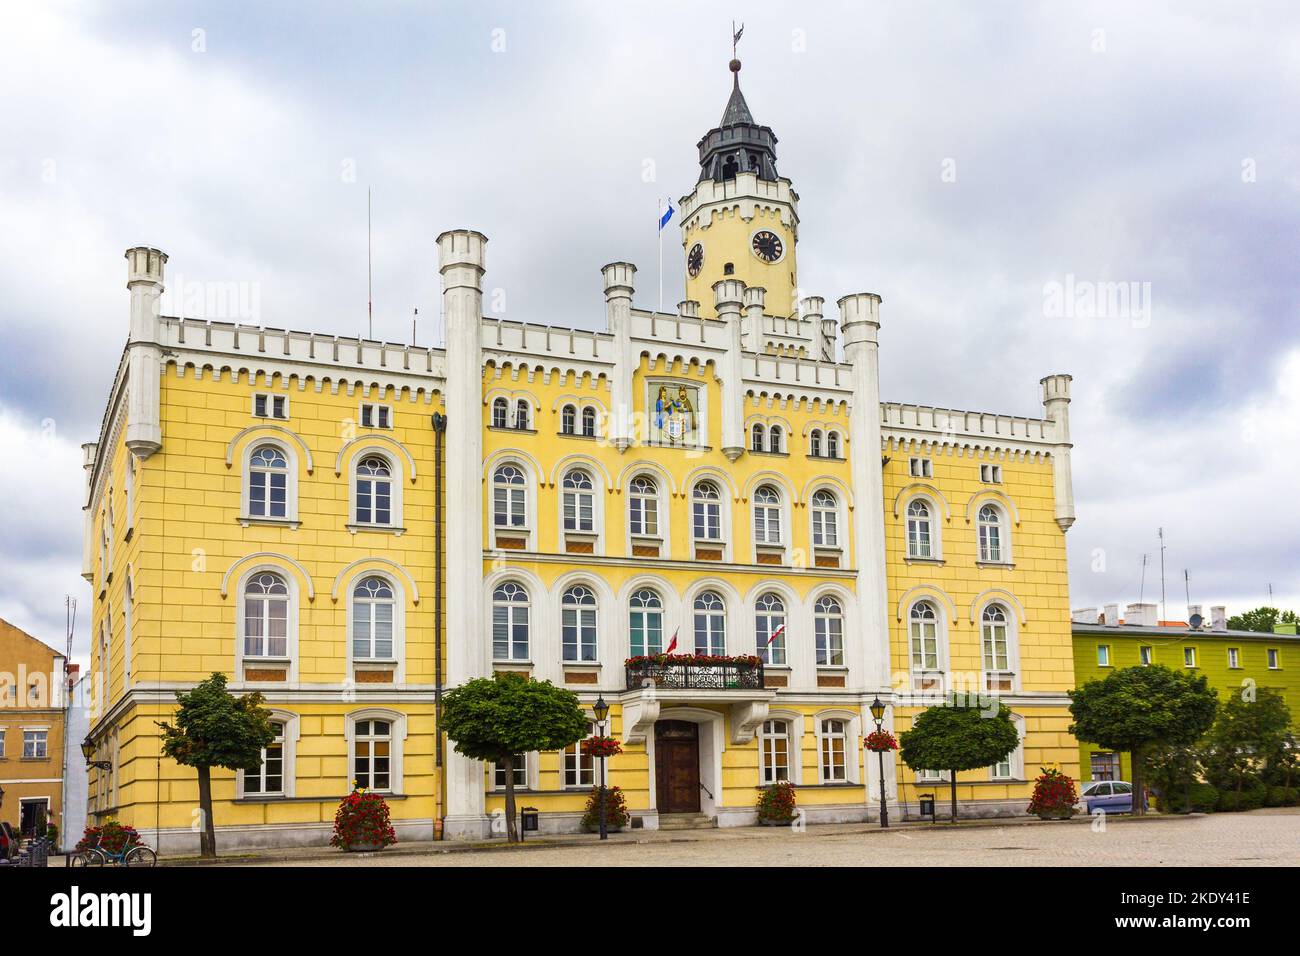 The building of the historic town hall in Wschowa Poland Stock Photo